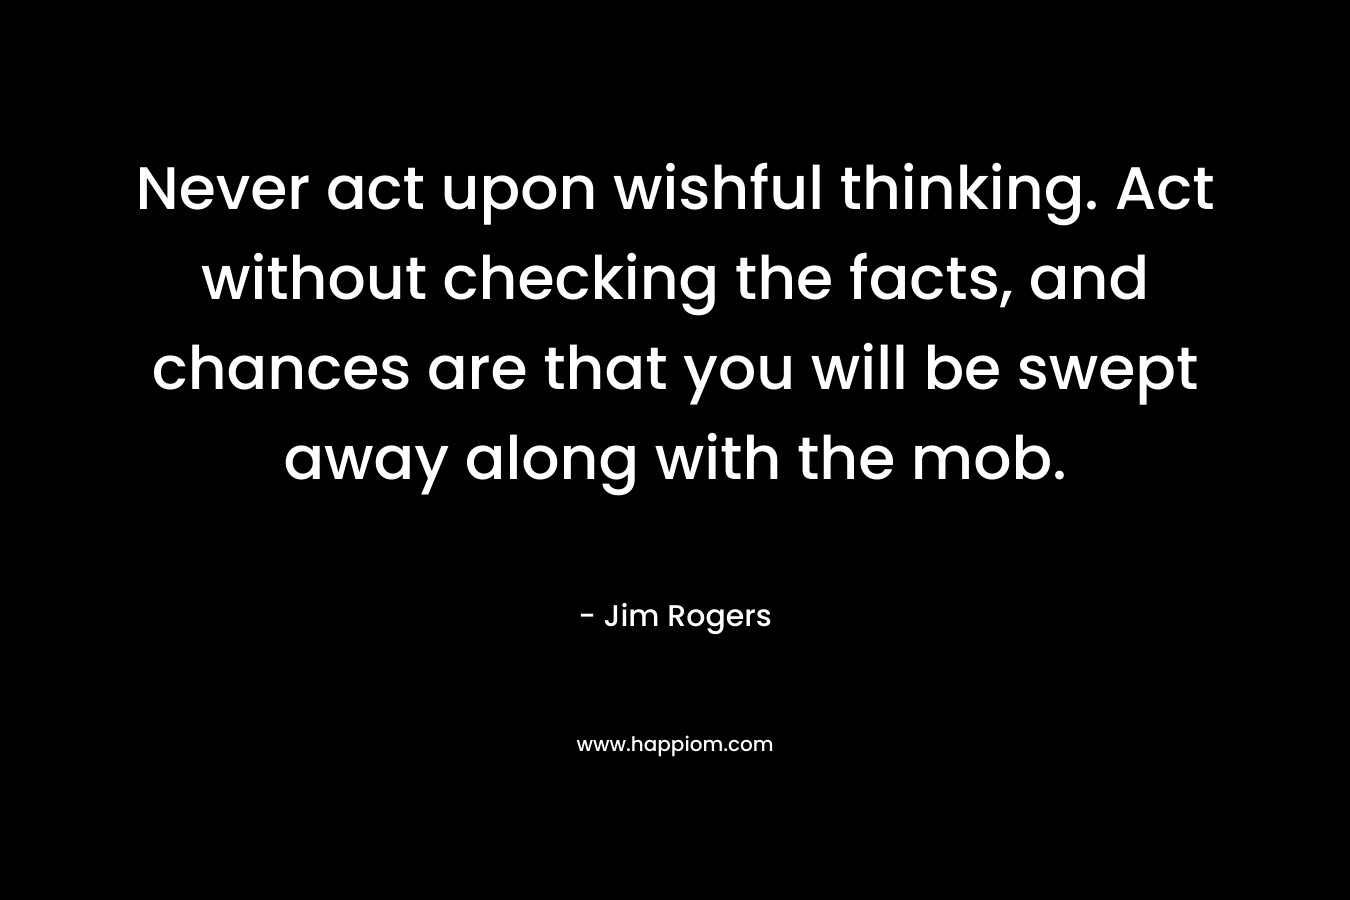 Never act upon wishful thinking. Act without checking the facts, and chances are that you will be swept away along with the mob. – Jim Rogers